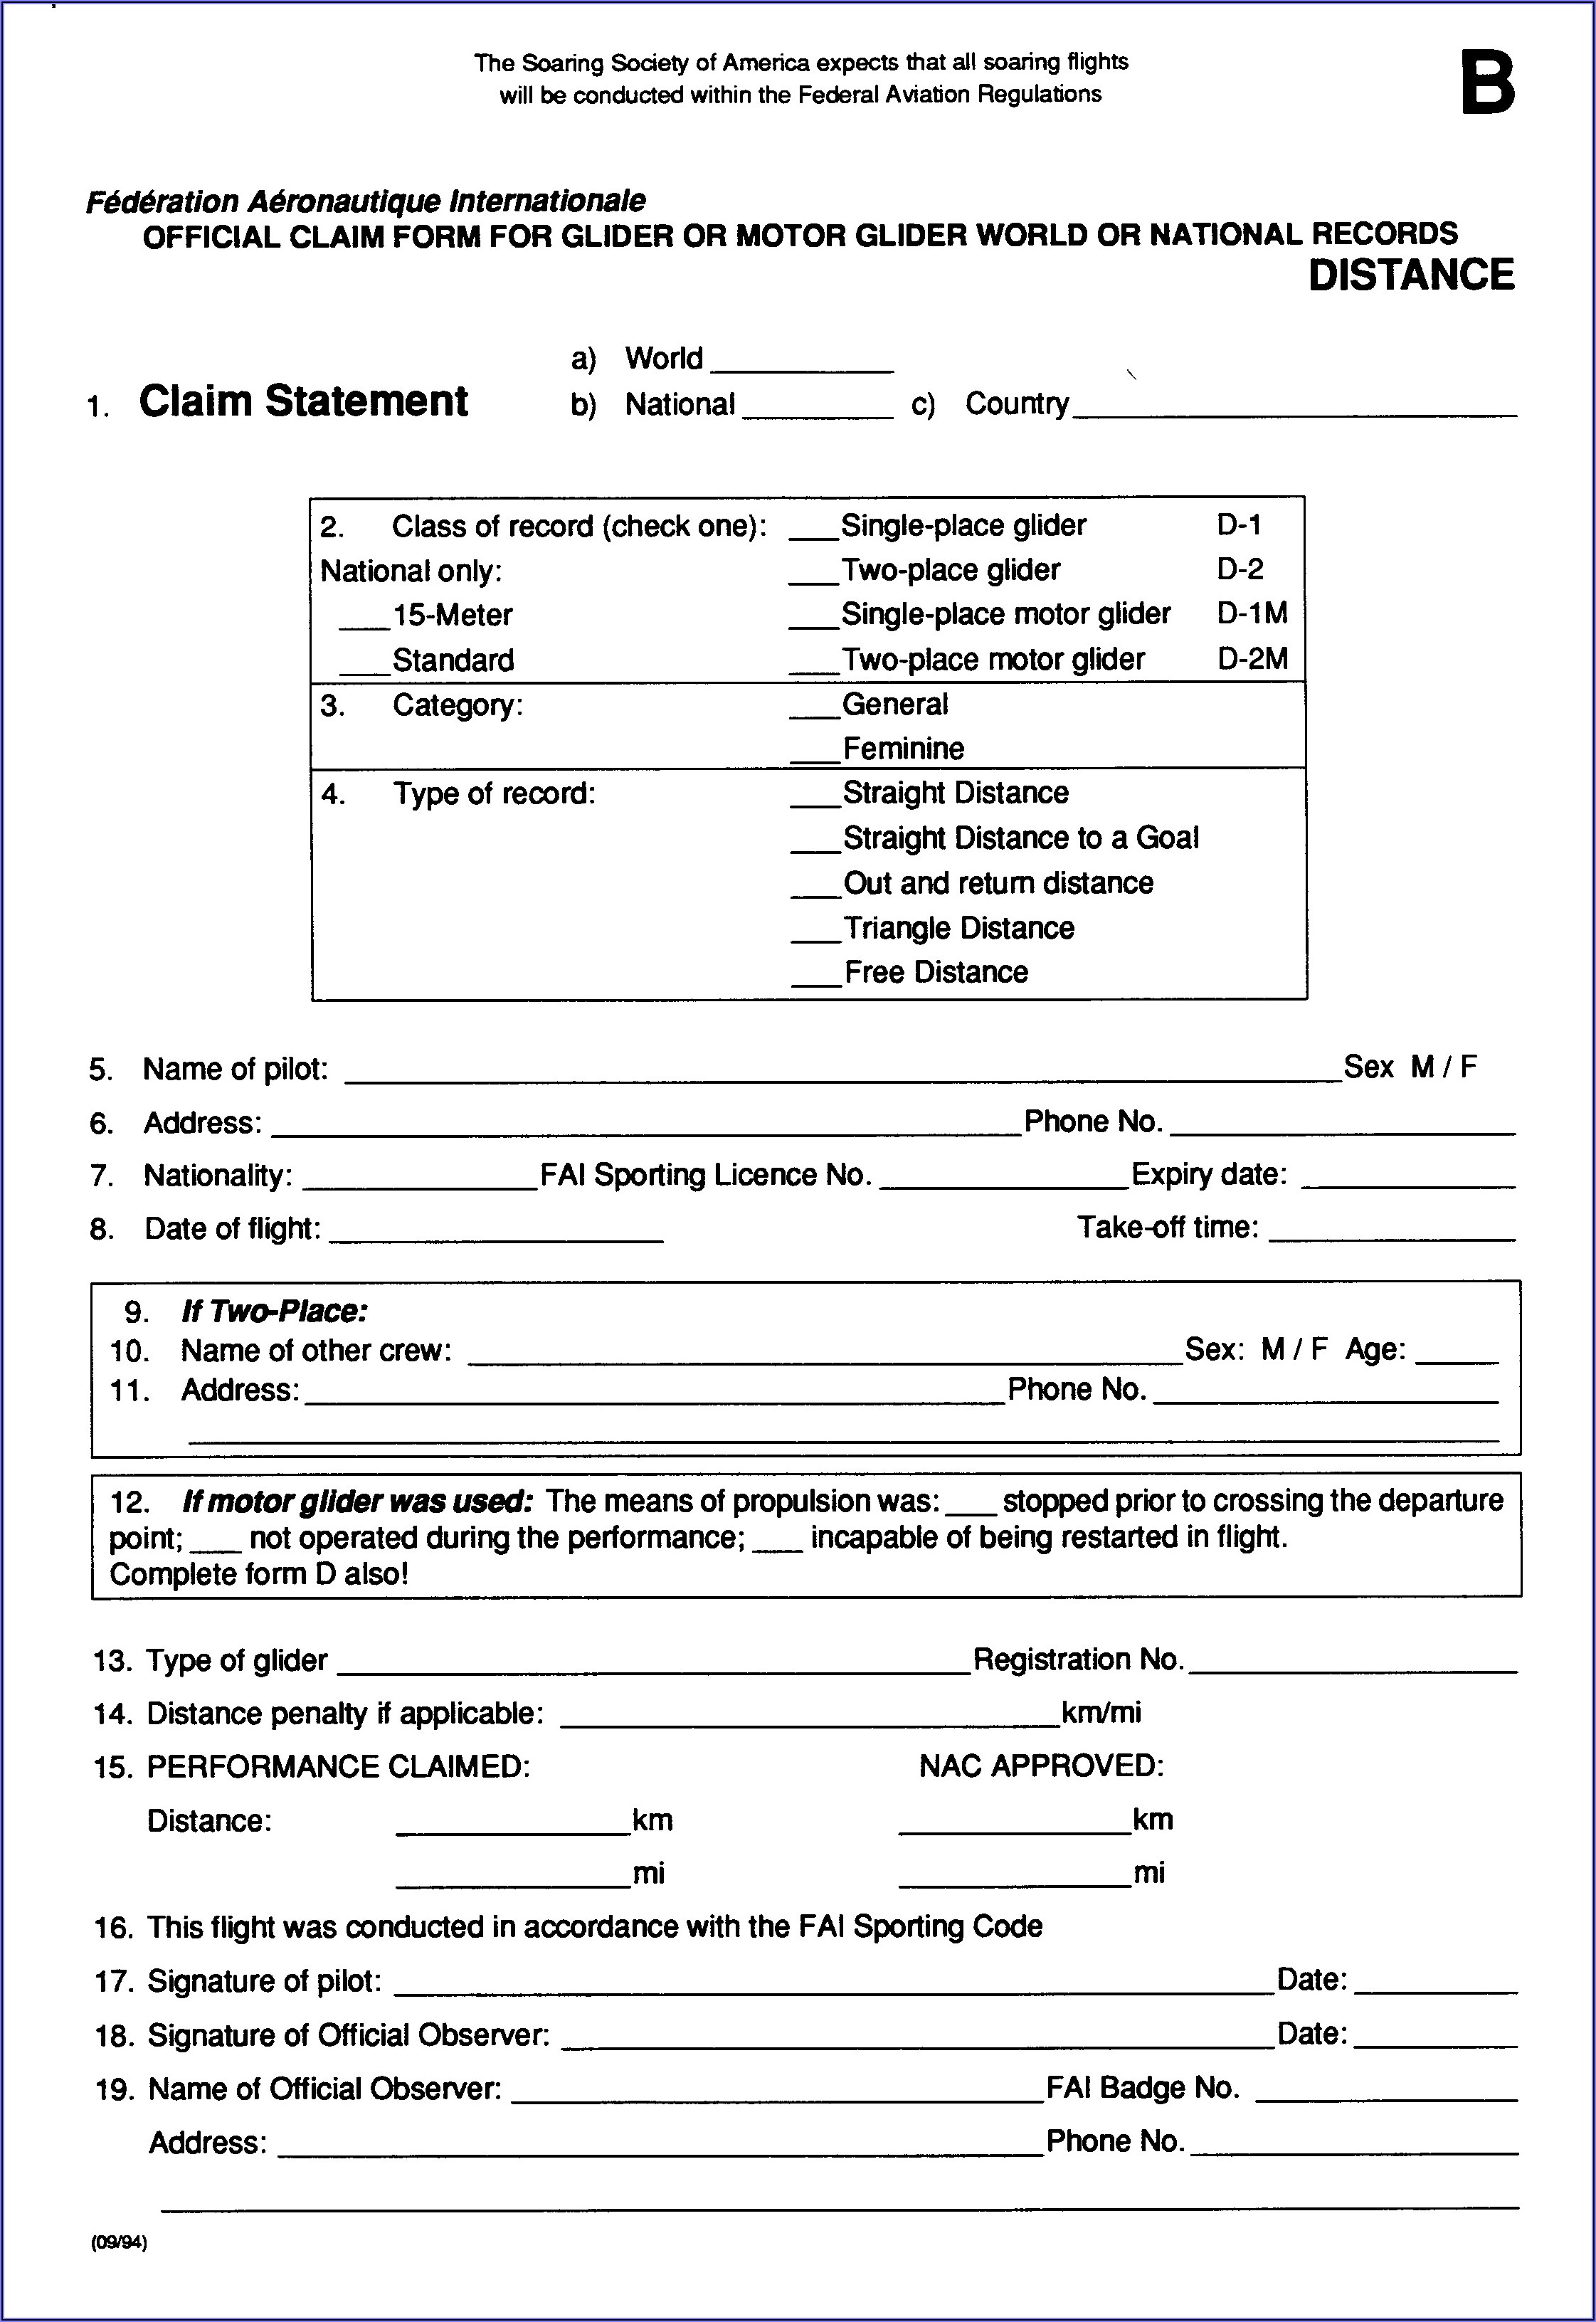 fillable-four-point-inspection-form-form-resume-examples-moyoa4r12z